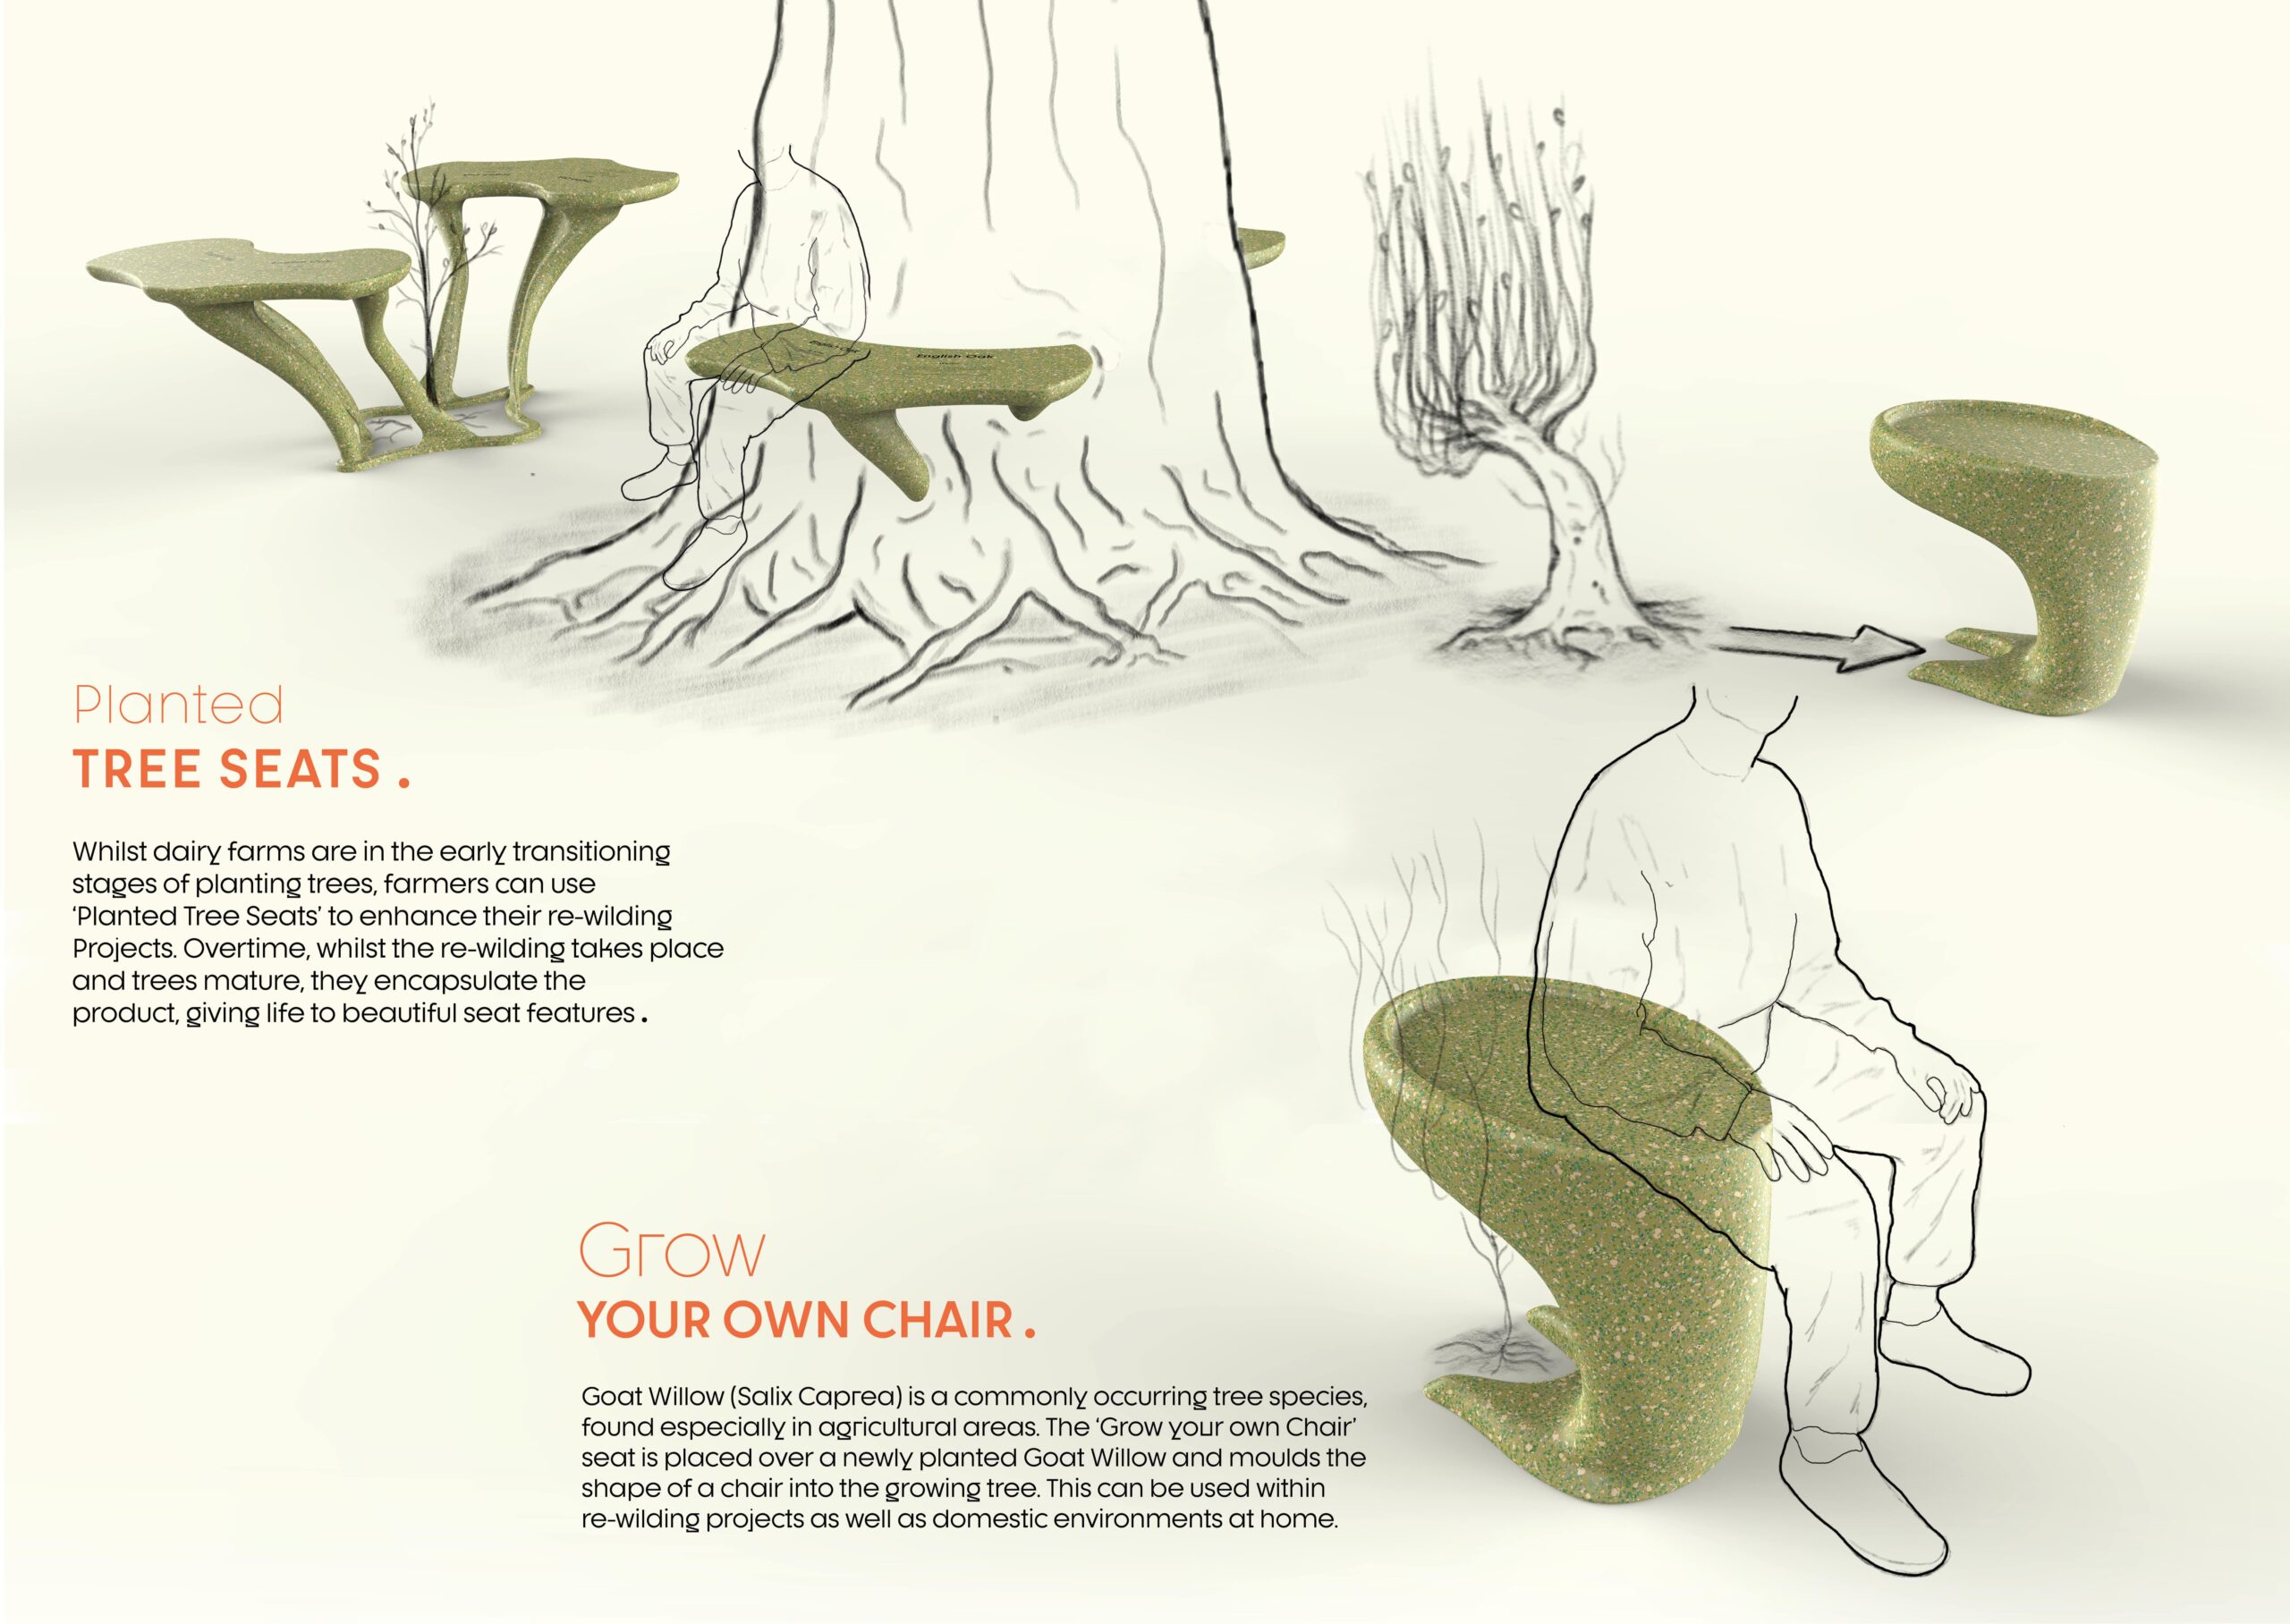 Benefits of the Tree Seat & Grow Your Own Chair